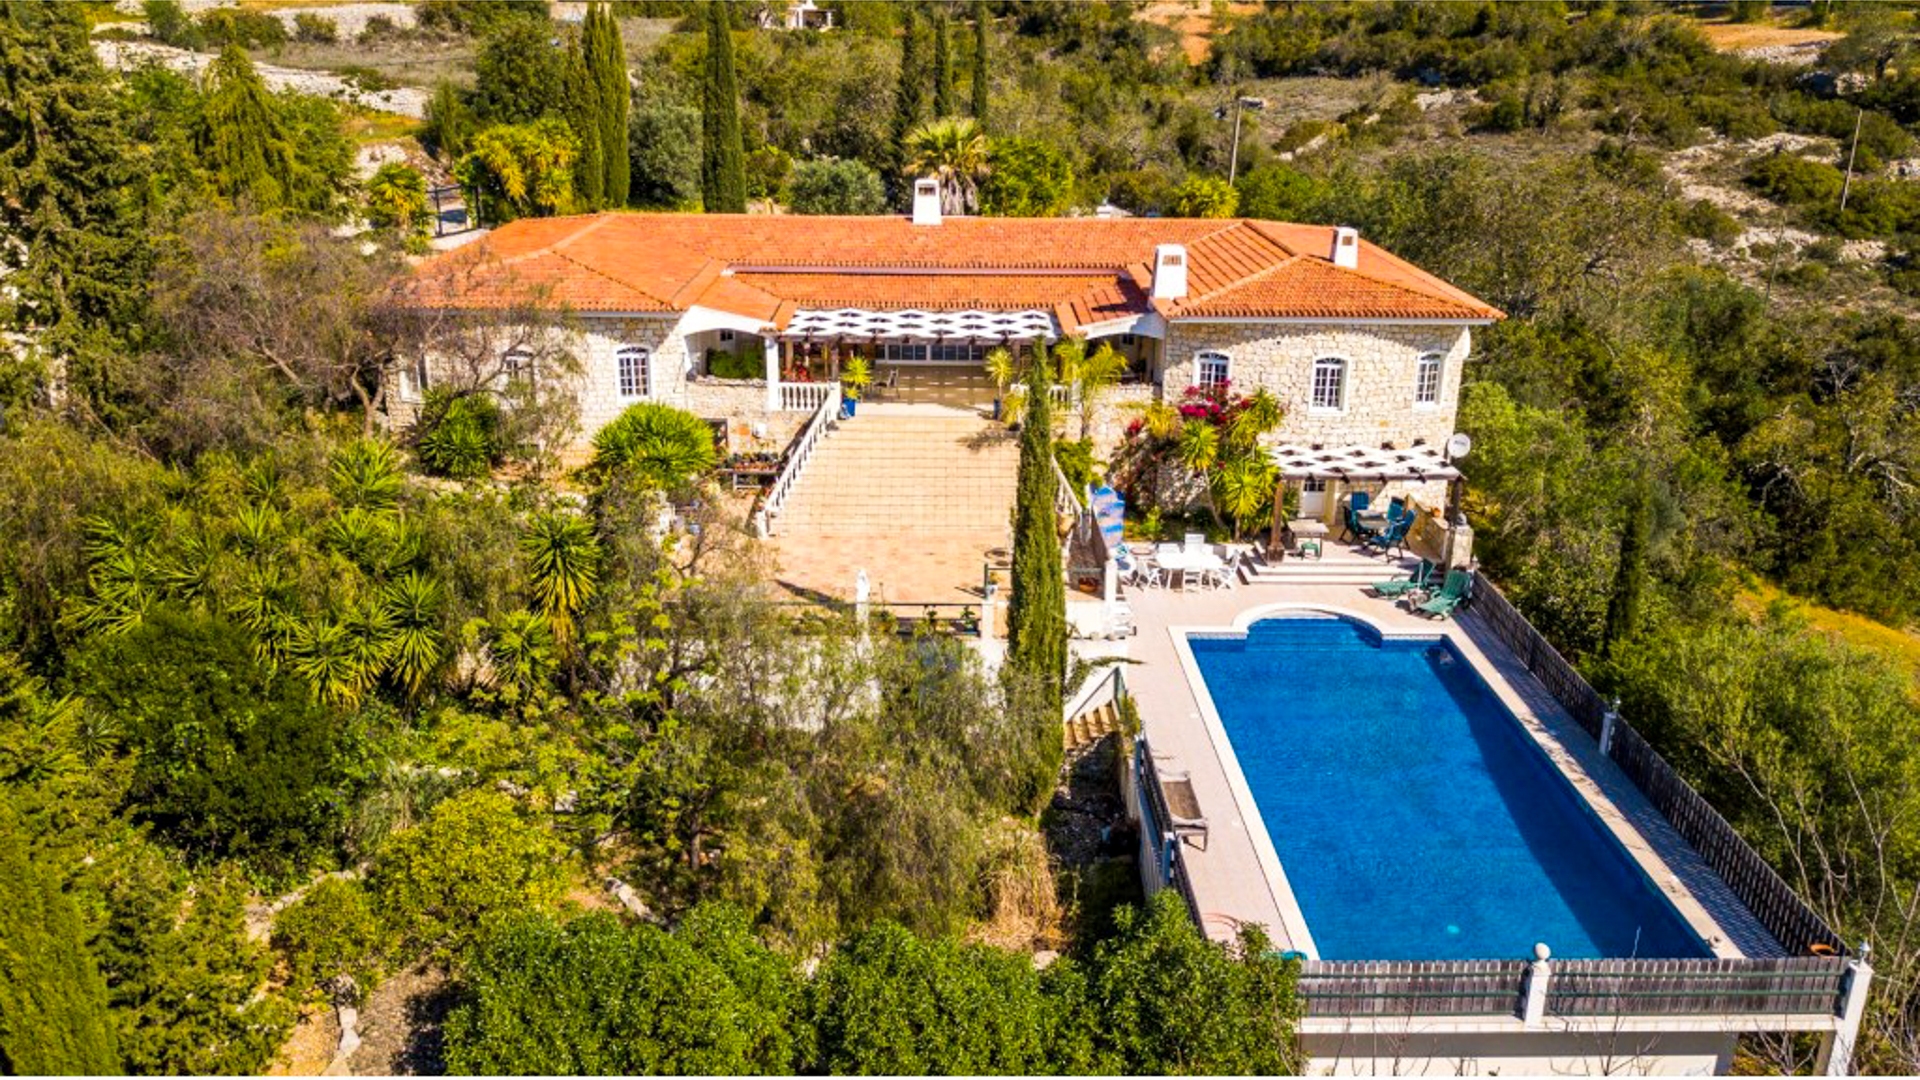 Fantastic Large 4 bedroom detached Villa with Stunning Sea Views, near Loule | VM451 